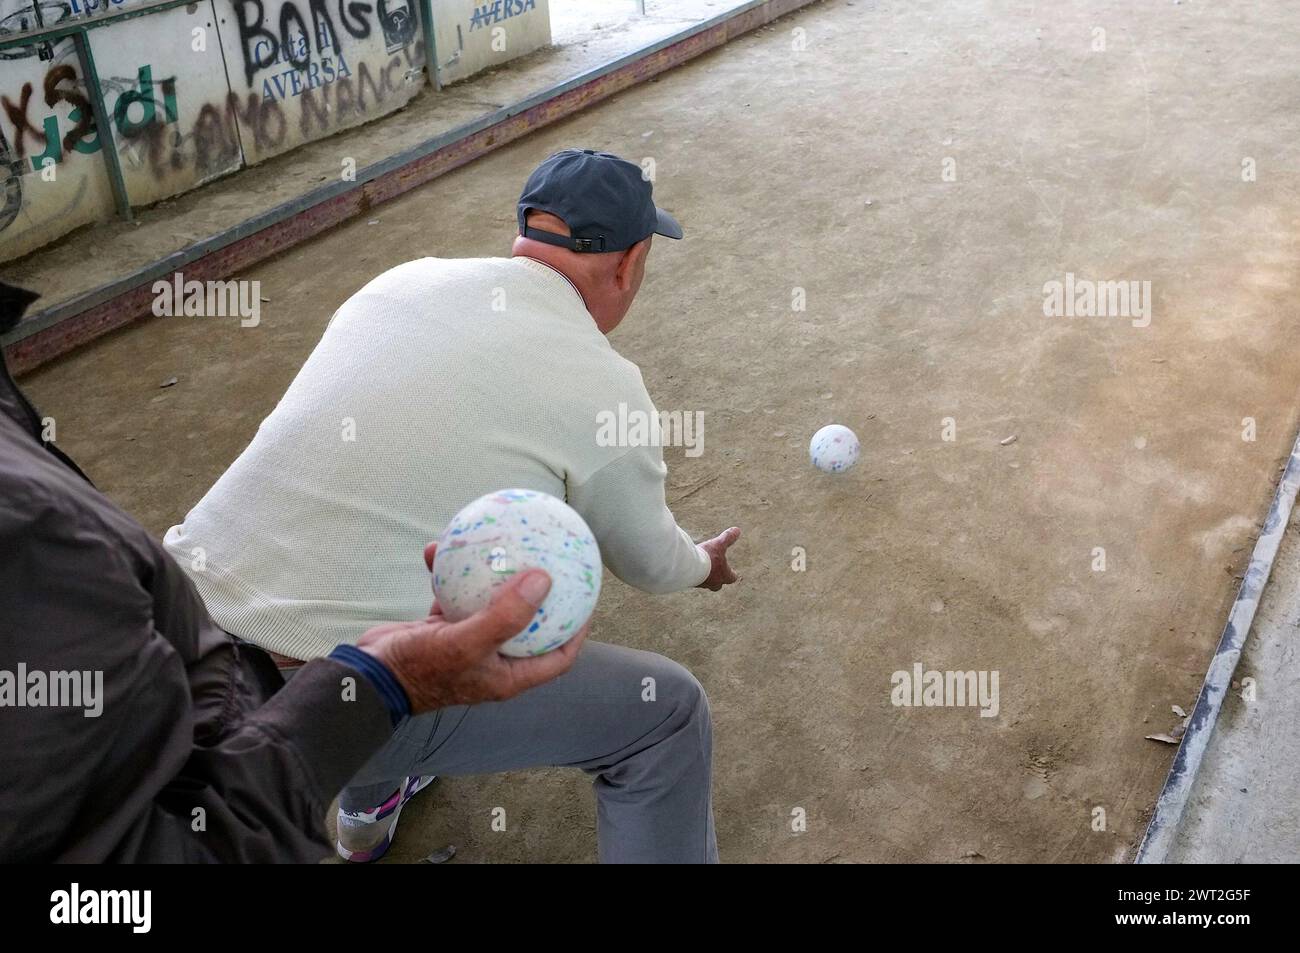 A man playing bowls during a competition in a sports facility in Aversa Stock Photo